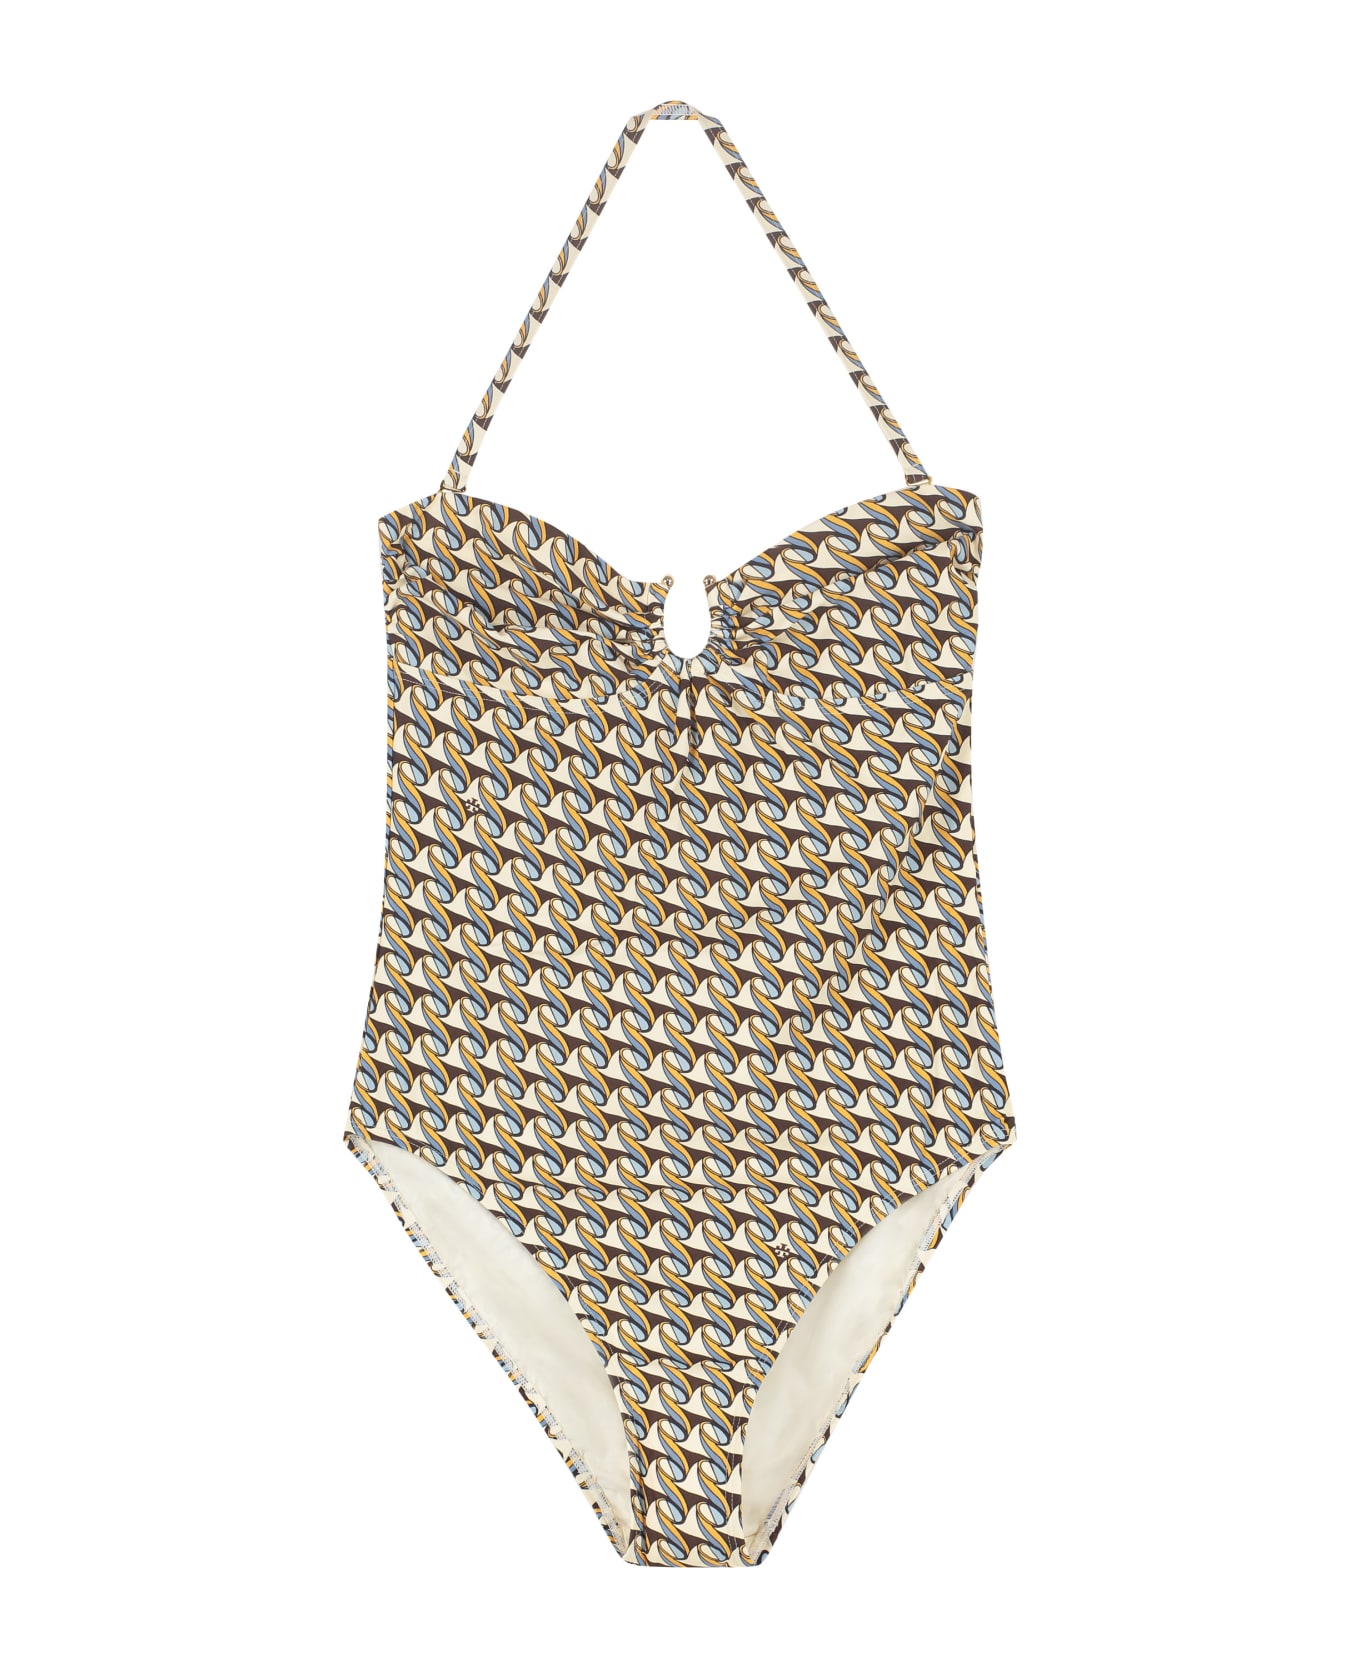 Tory Burch Printed One-piece Swimsuit - BEIGE